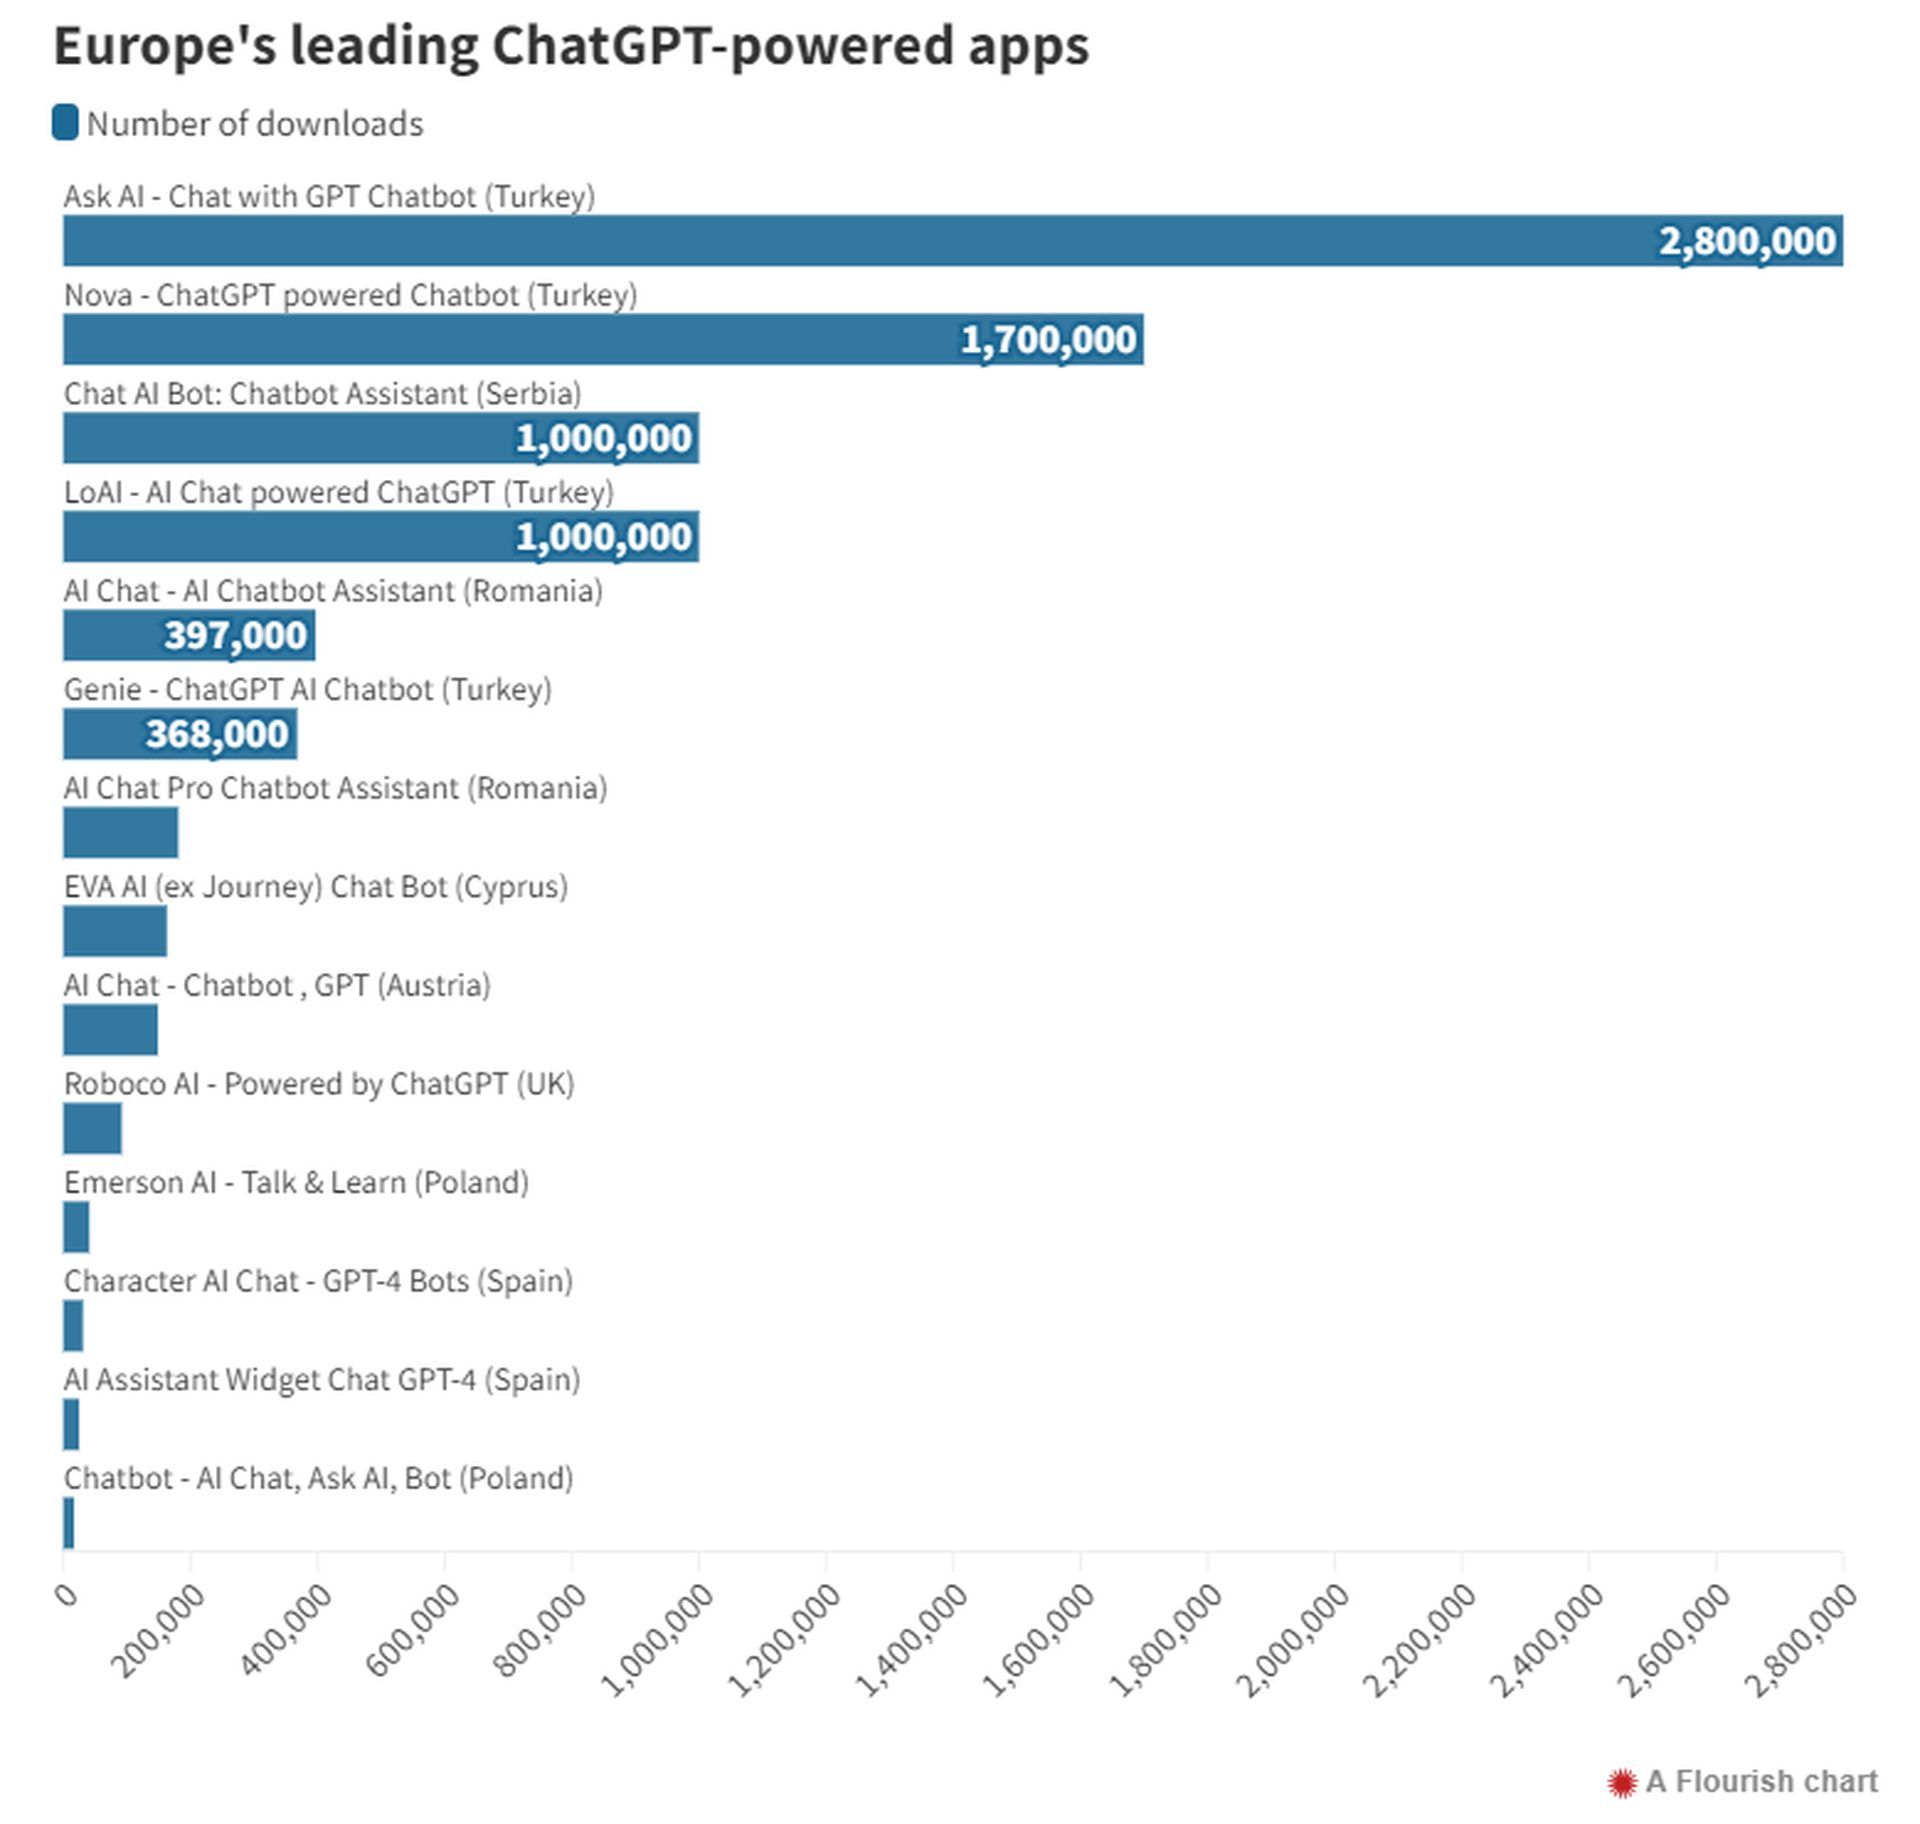 AI chat apps are rising in Europe, especially in Turkey